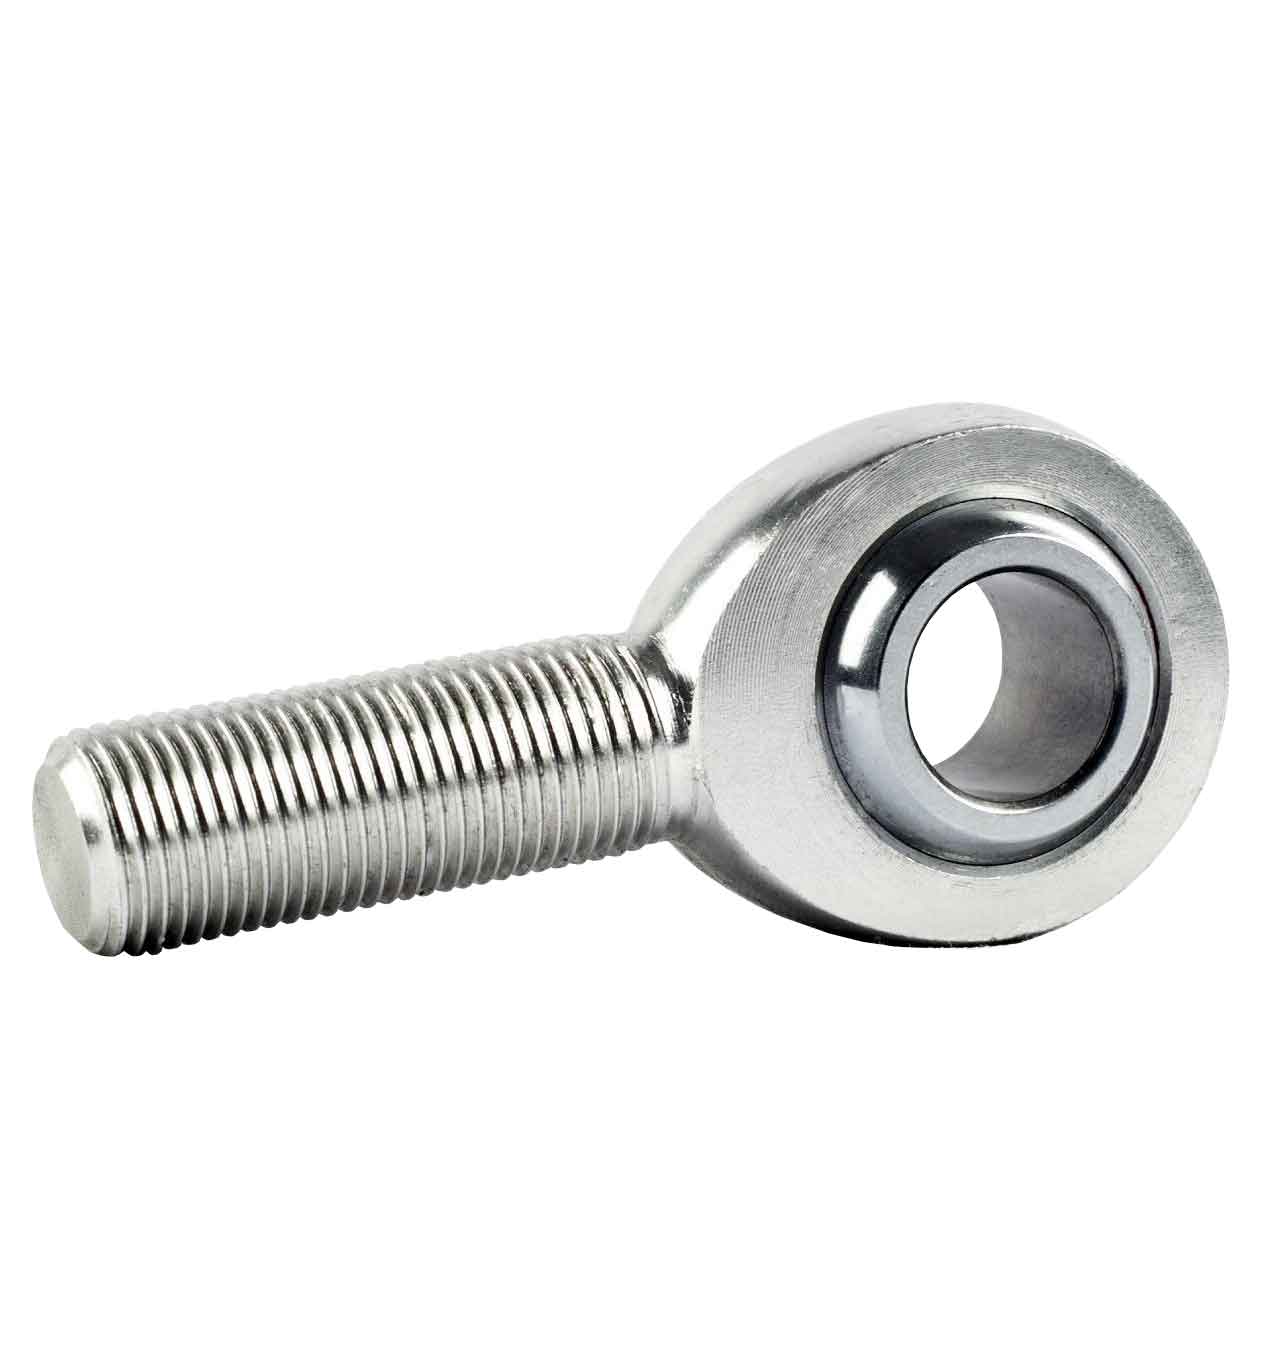 SS-POS5 GENERIC 5mm M5X0.8 STAINLESS STEEL MALE ROD END BEARING Thumbnail